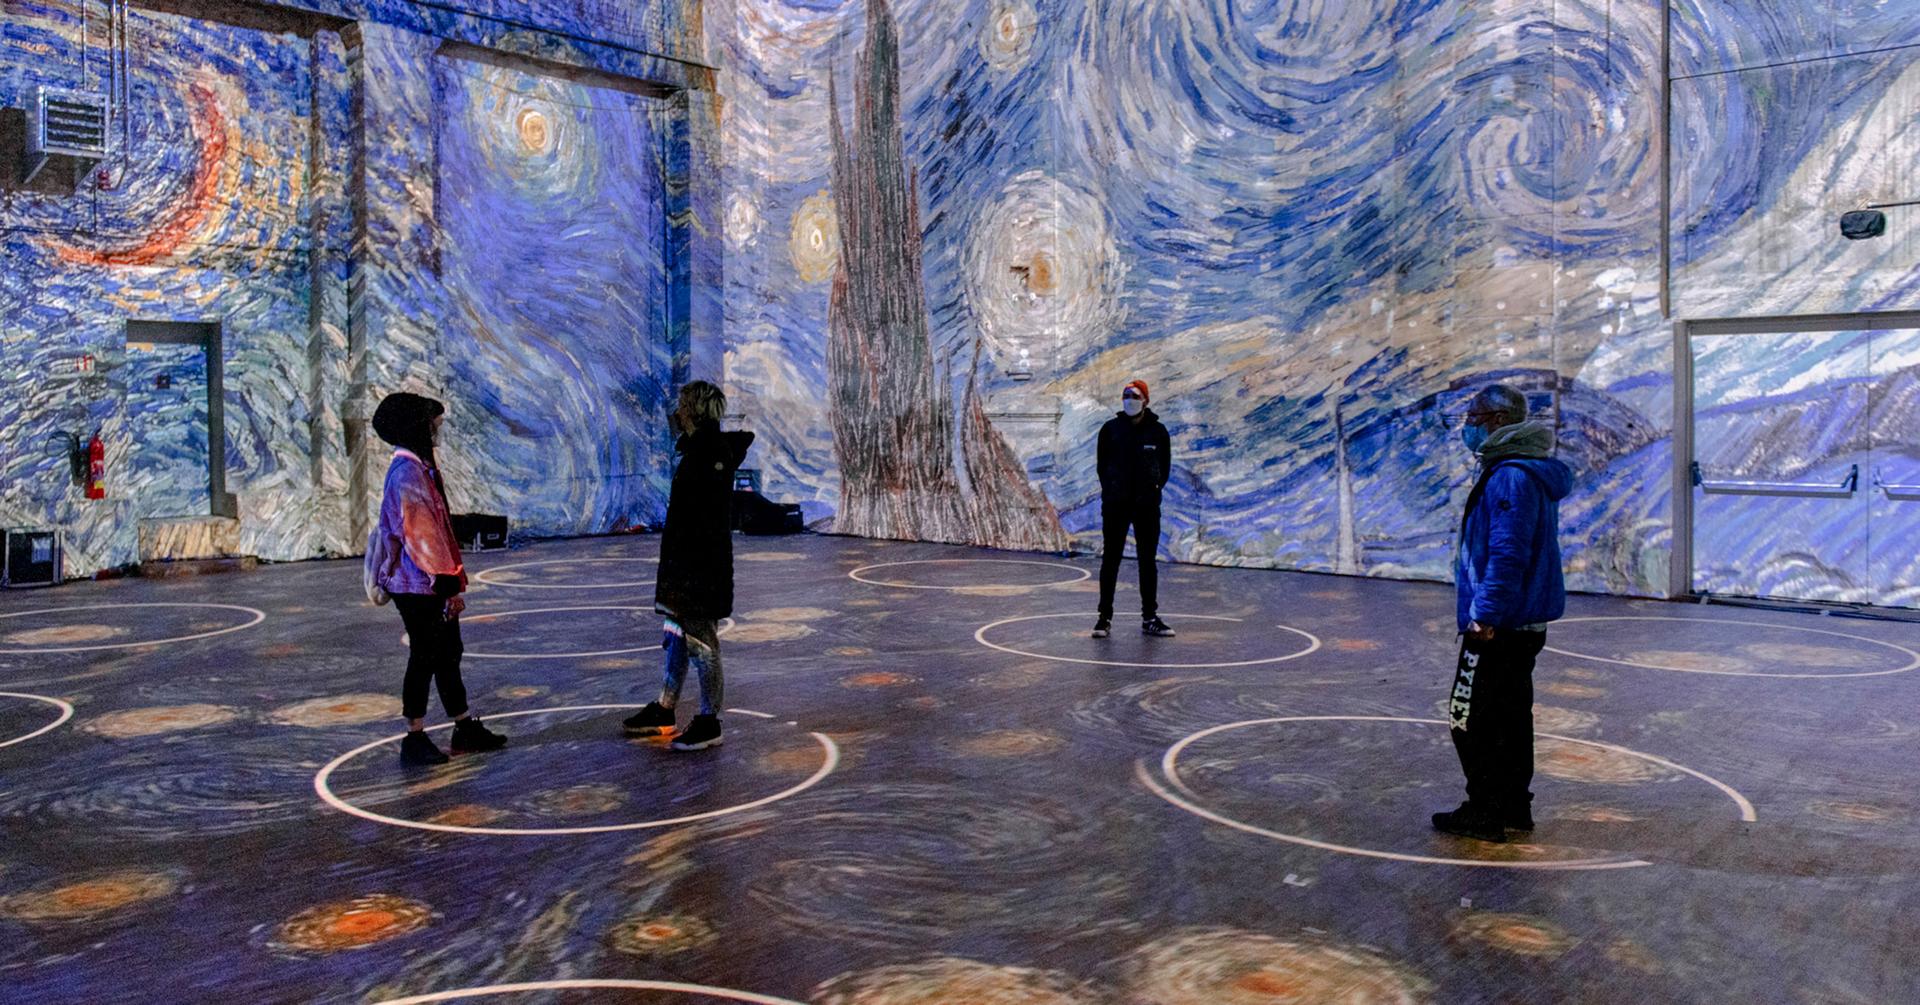 A photo mock up of Van Gogh art projected in a space with people standing in 